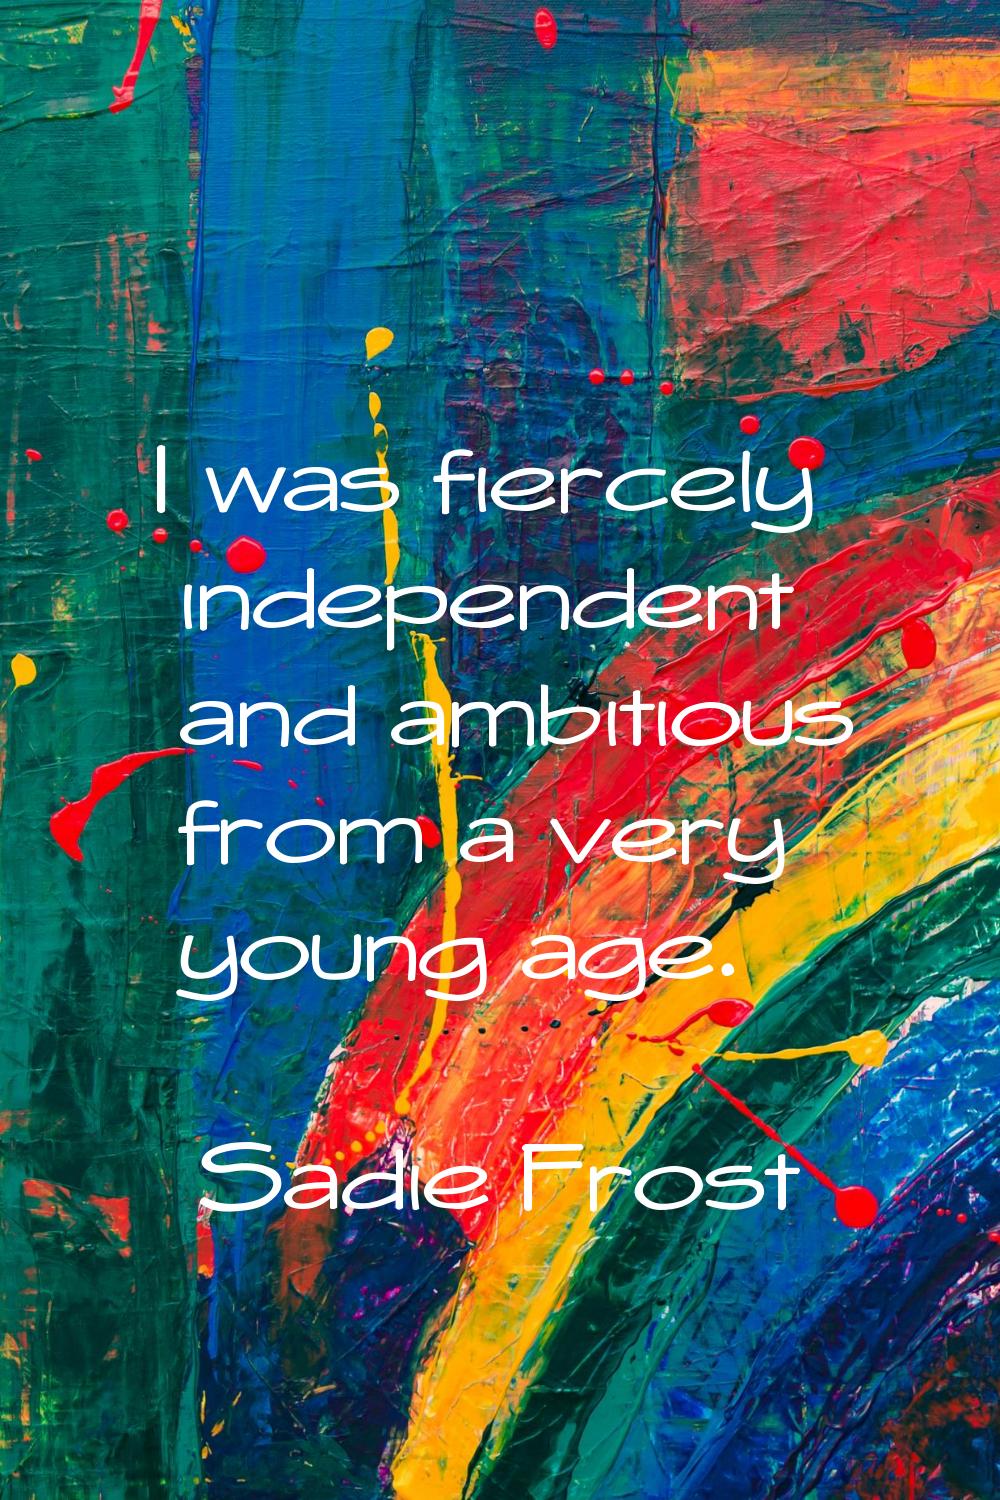 I was fiercely independent and ambitious from a very young age.